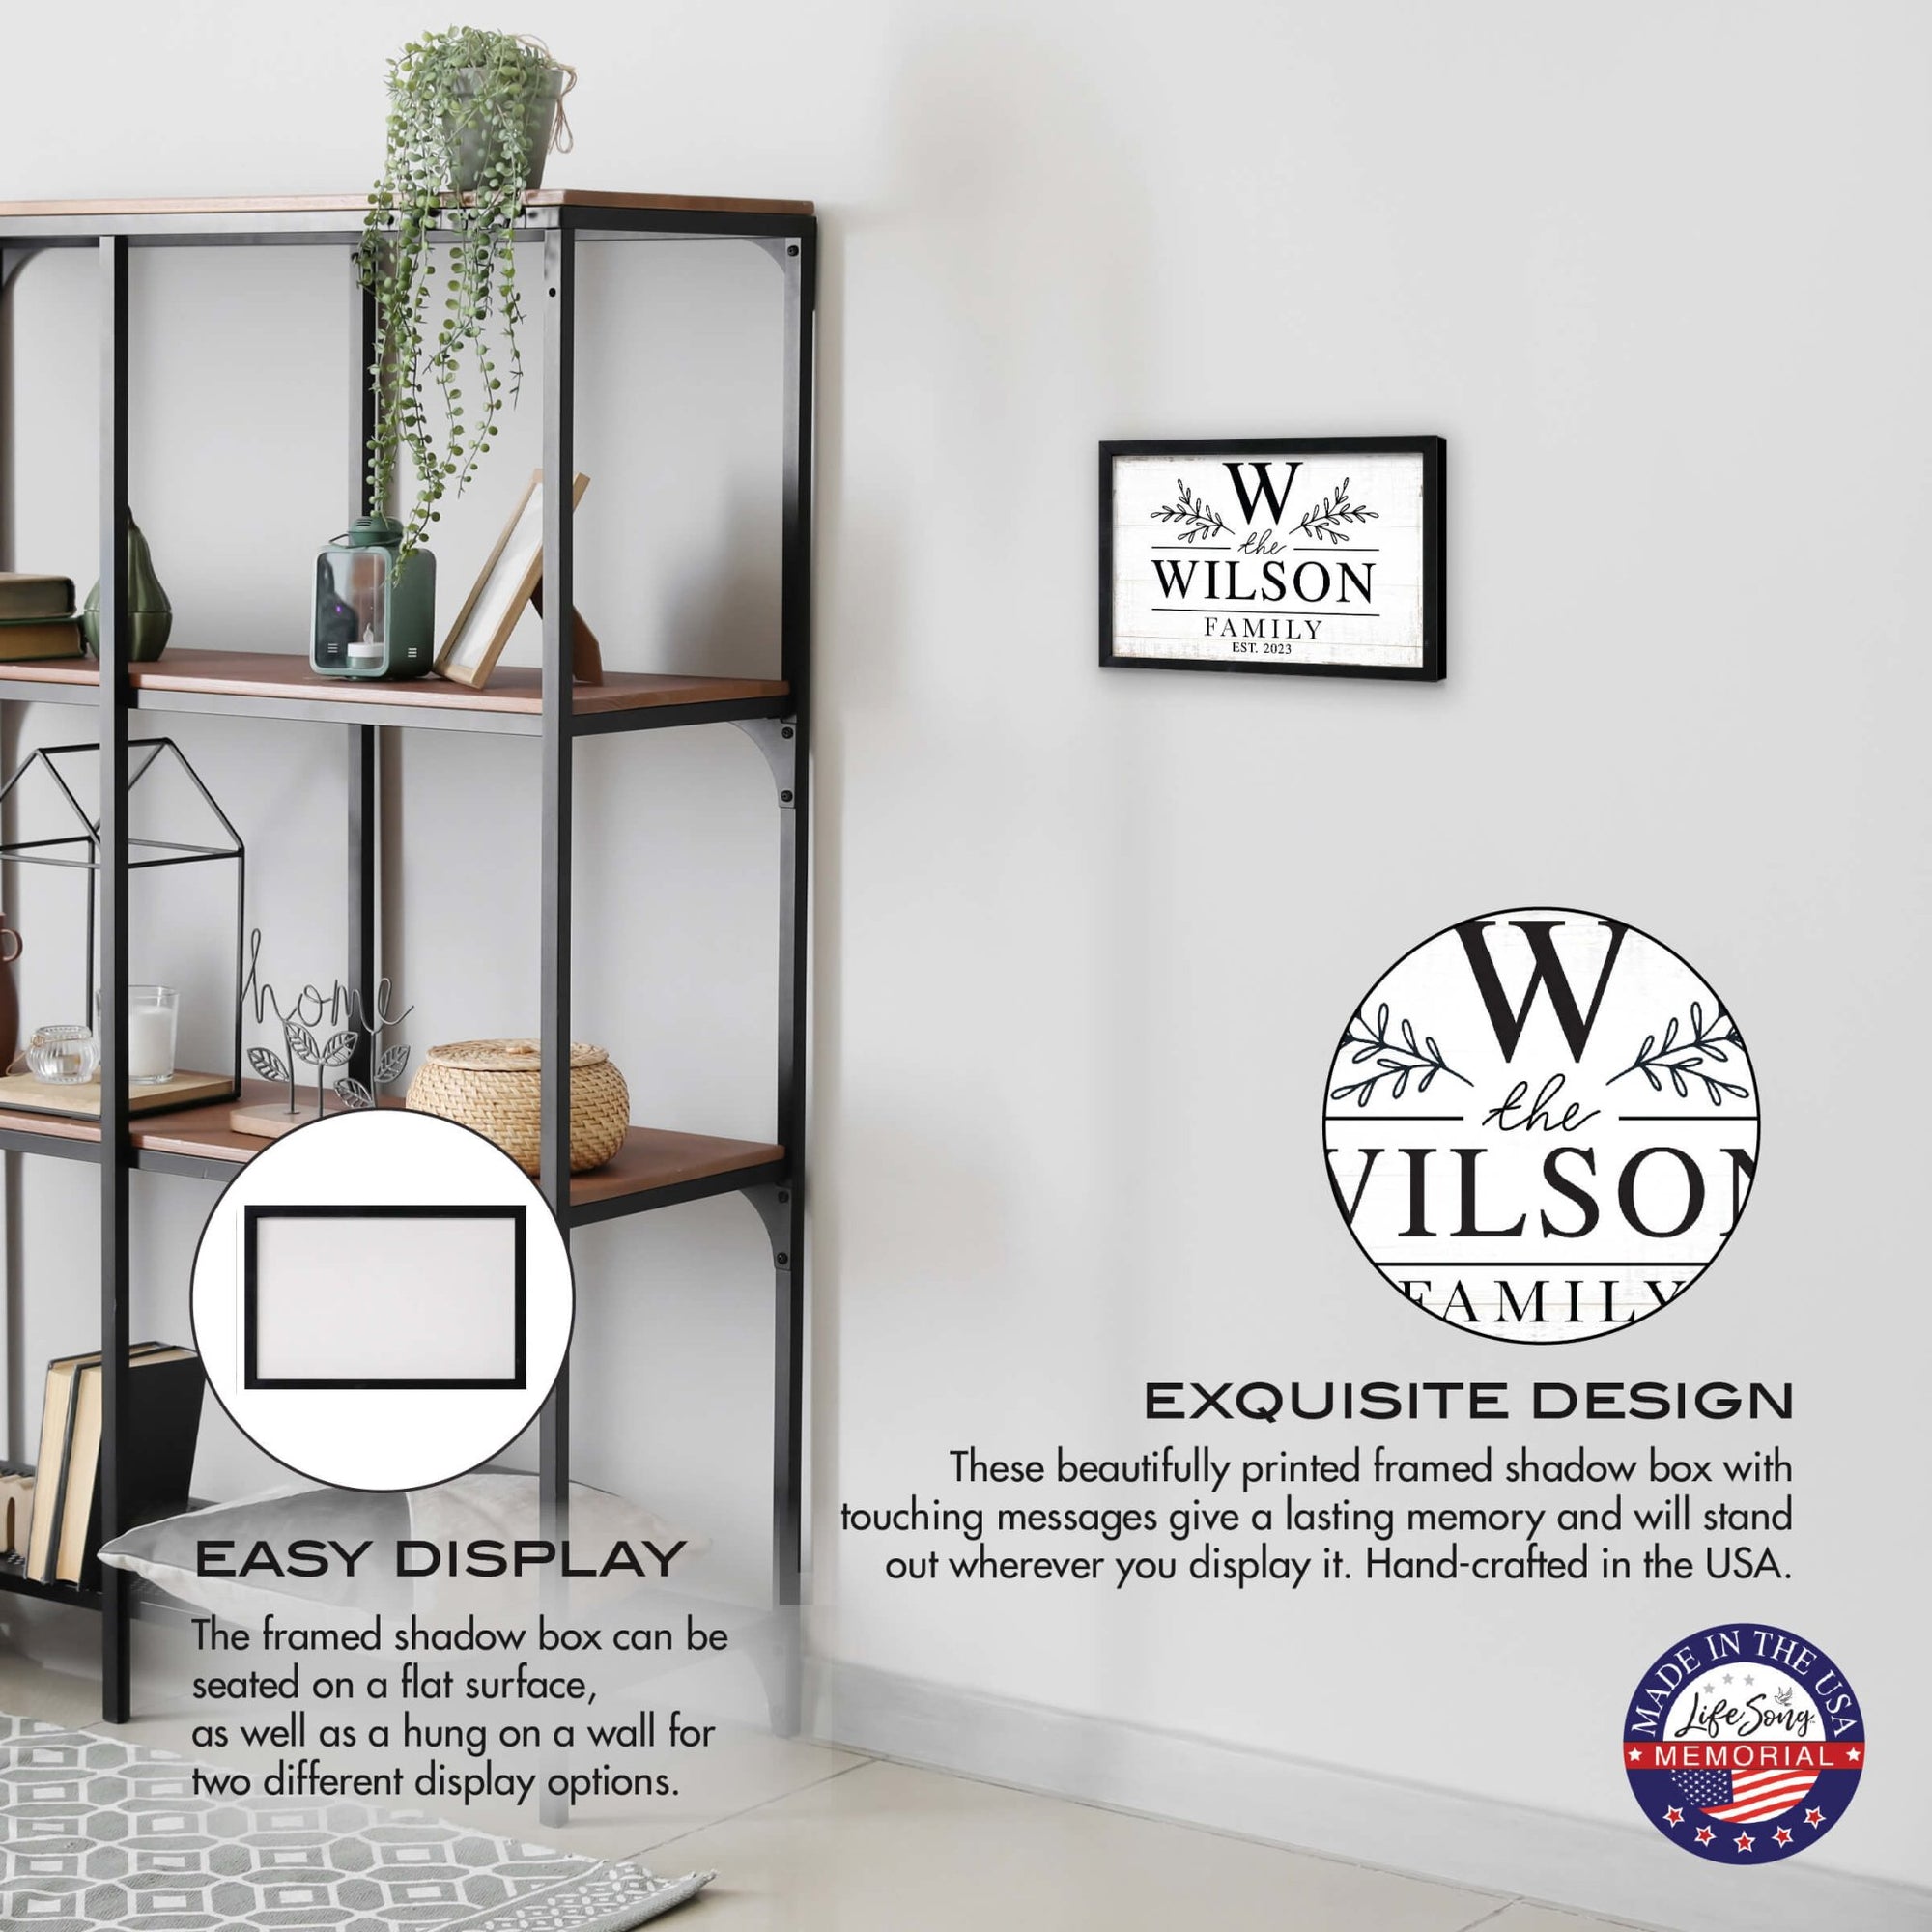 Add a Personal Touch to Your Family Home Décor with LifeSong Milestones Custom Framed Shadow Box - Wilson Family - LifeSong Milestones